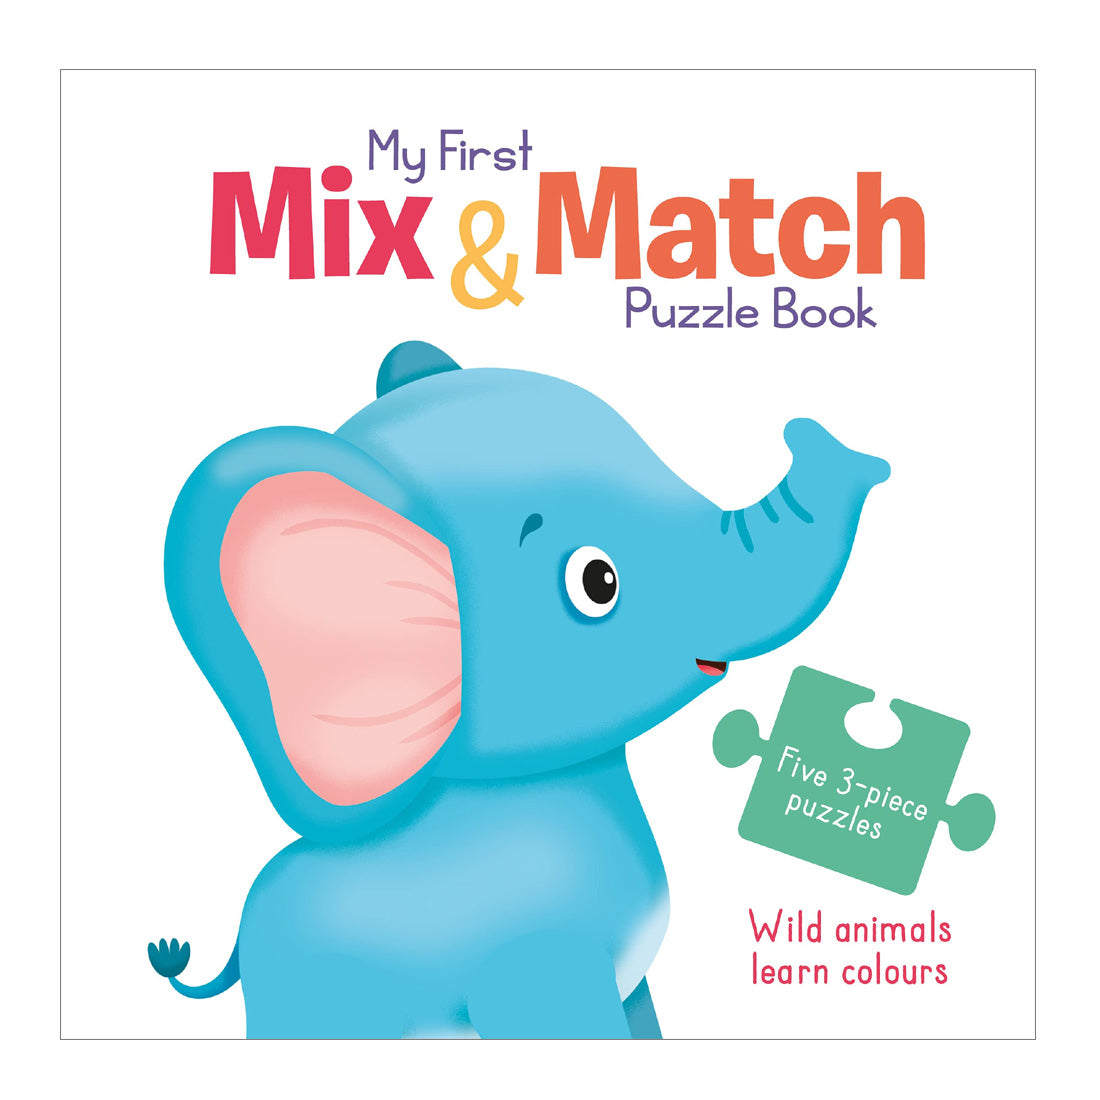 Mix & Match Puzzle Book: Wild Animals Learn Colours